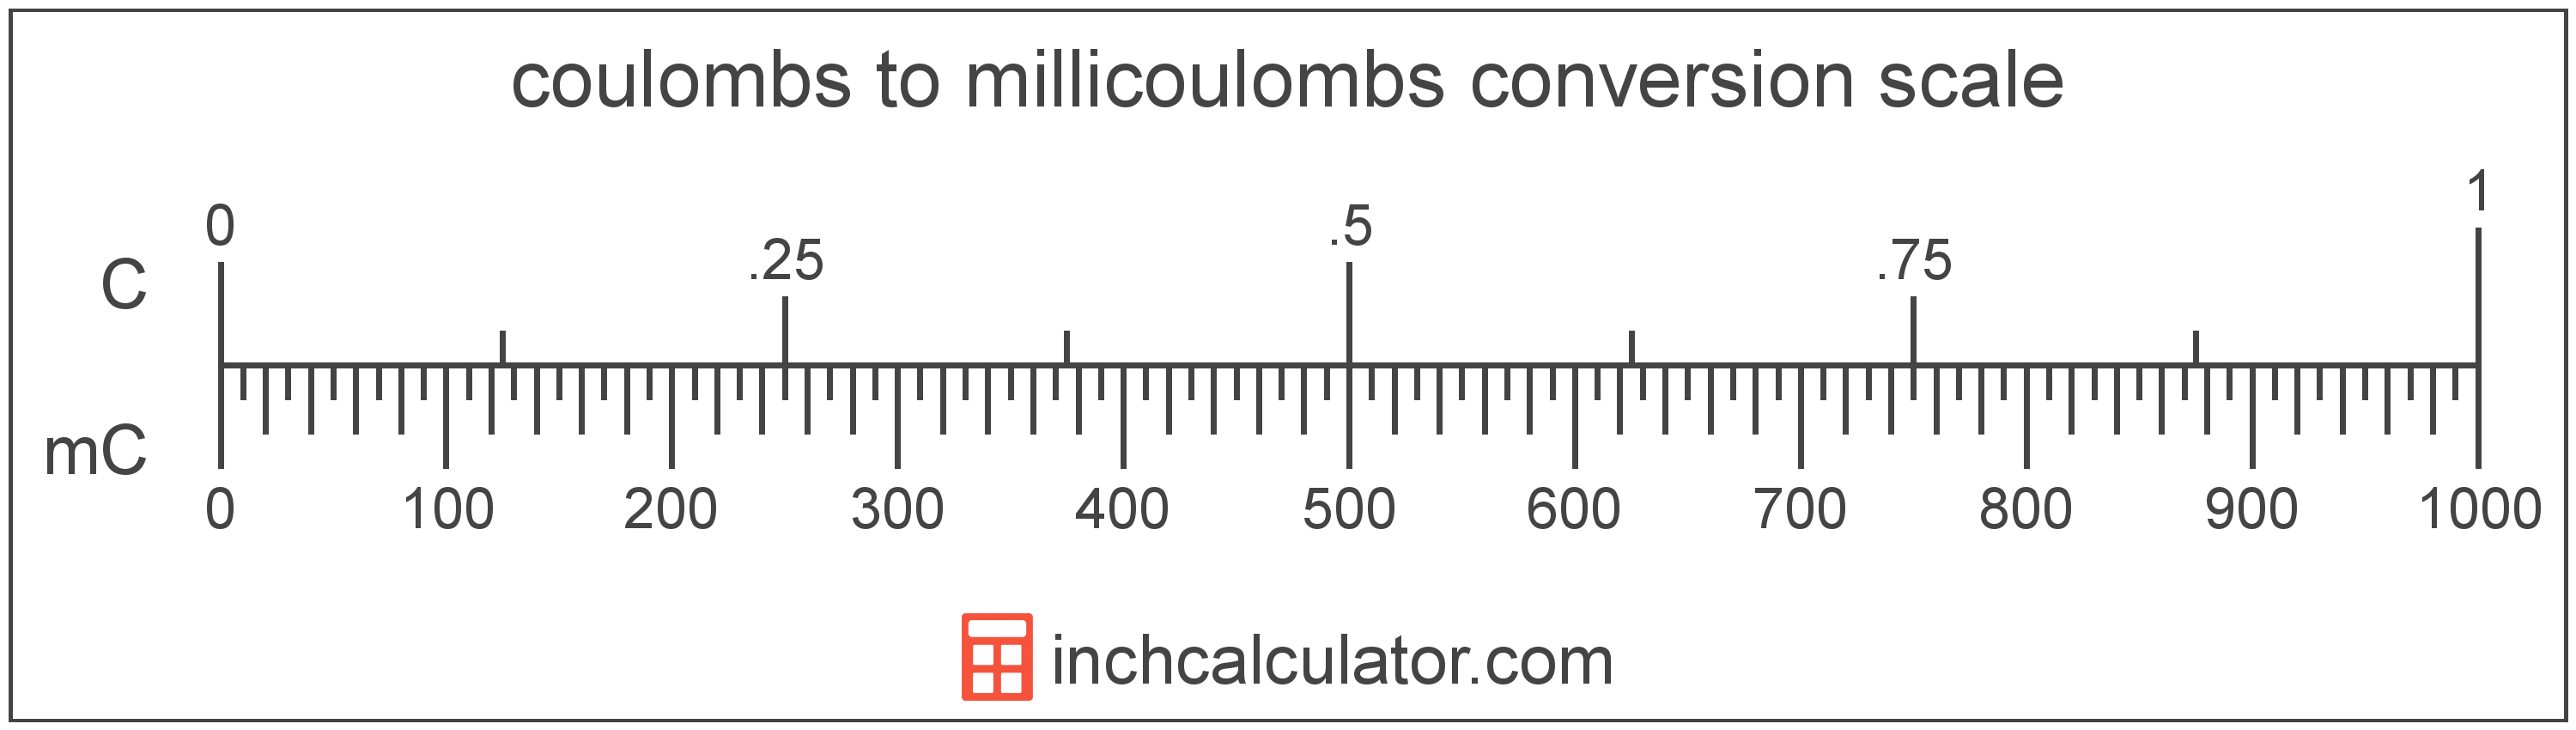 conversion scale showing millicoulombs and equivalent coulombs electric charge values